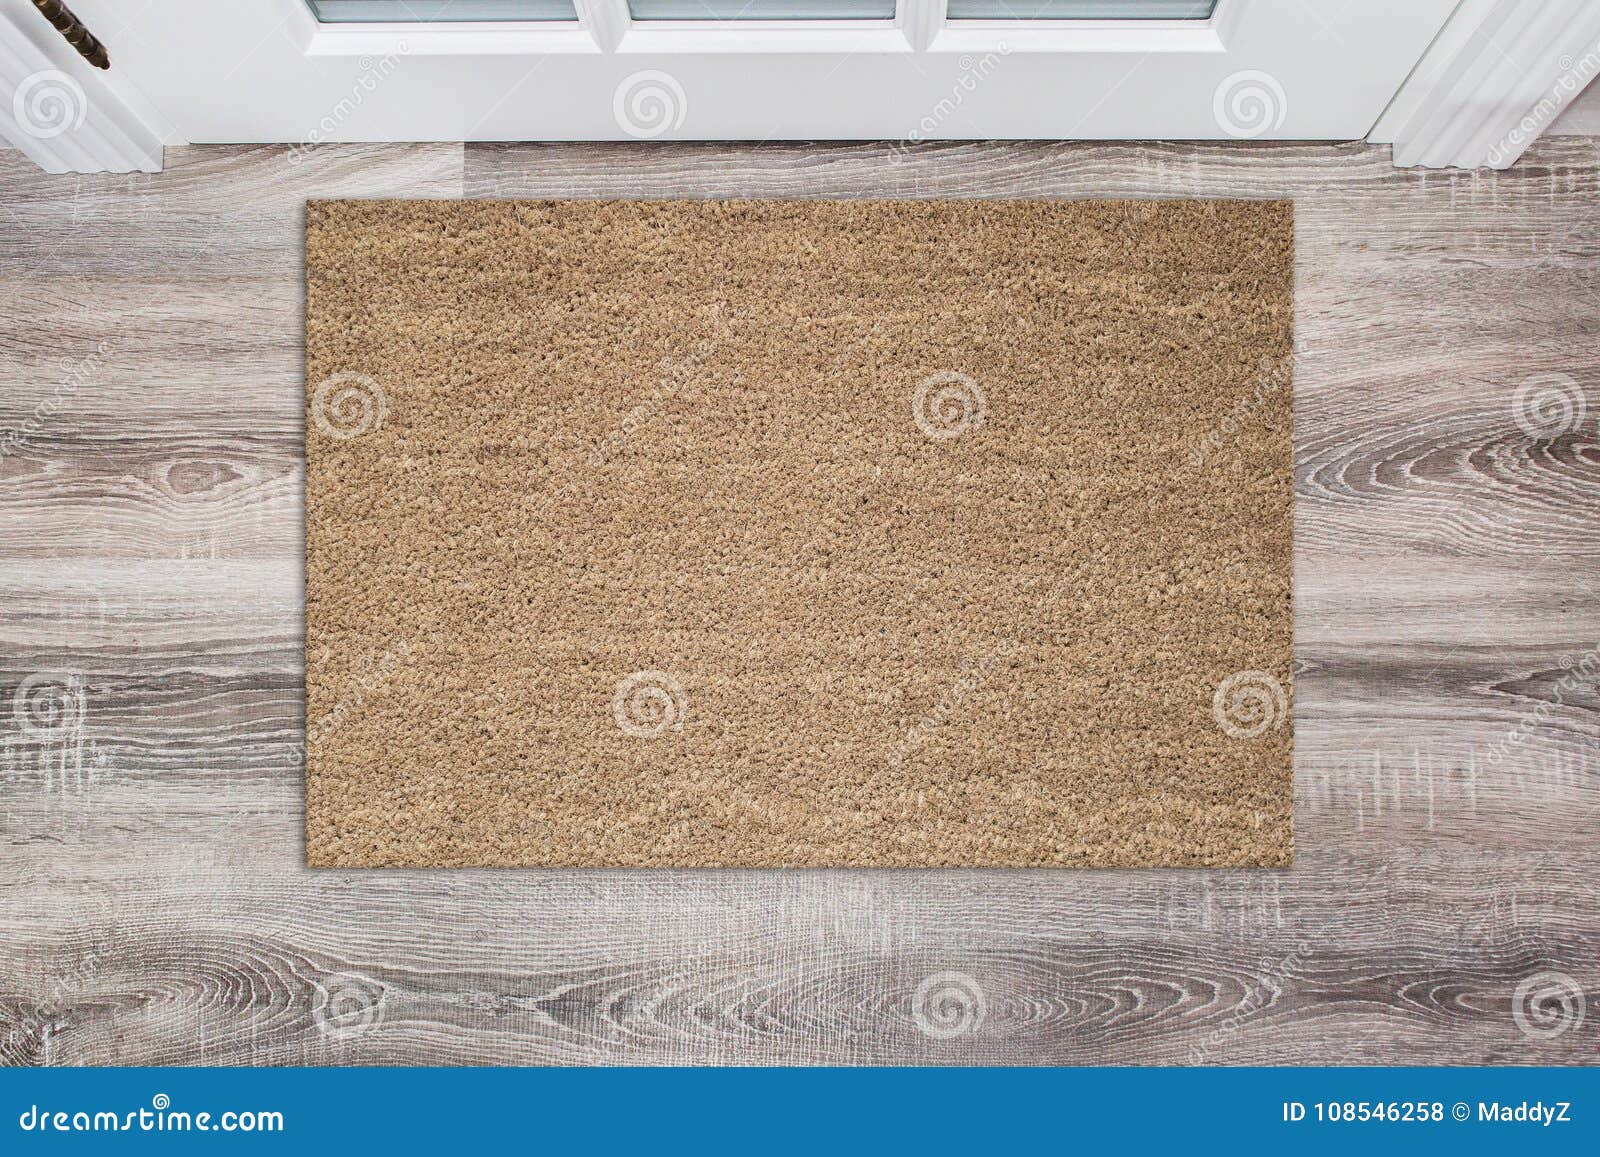 blank tan colored coir doormat before the white door in the hall. mat on wooden floor, product mockup